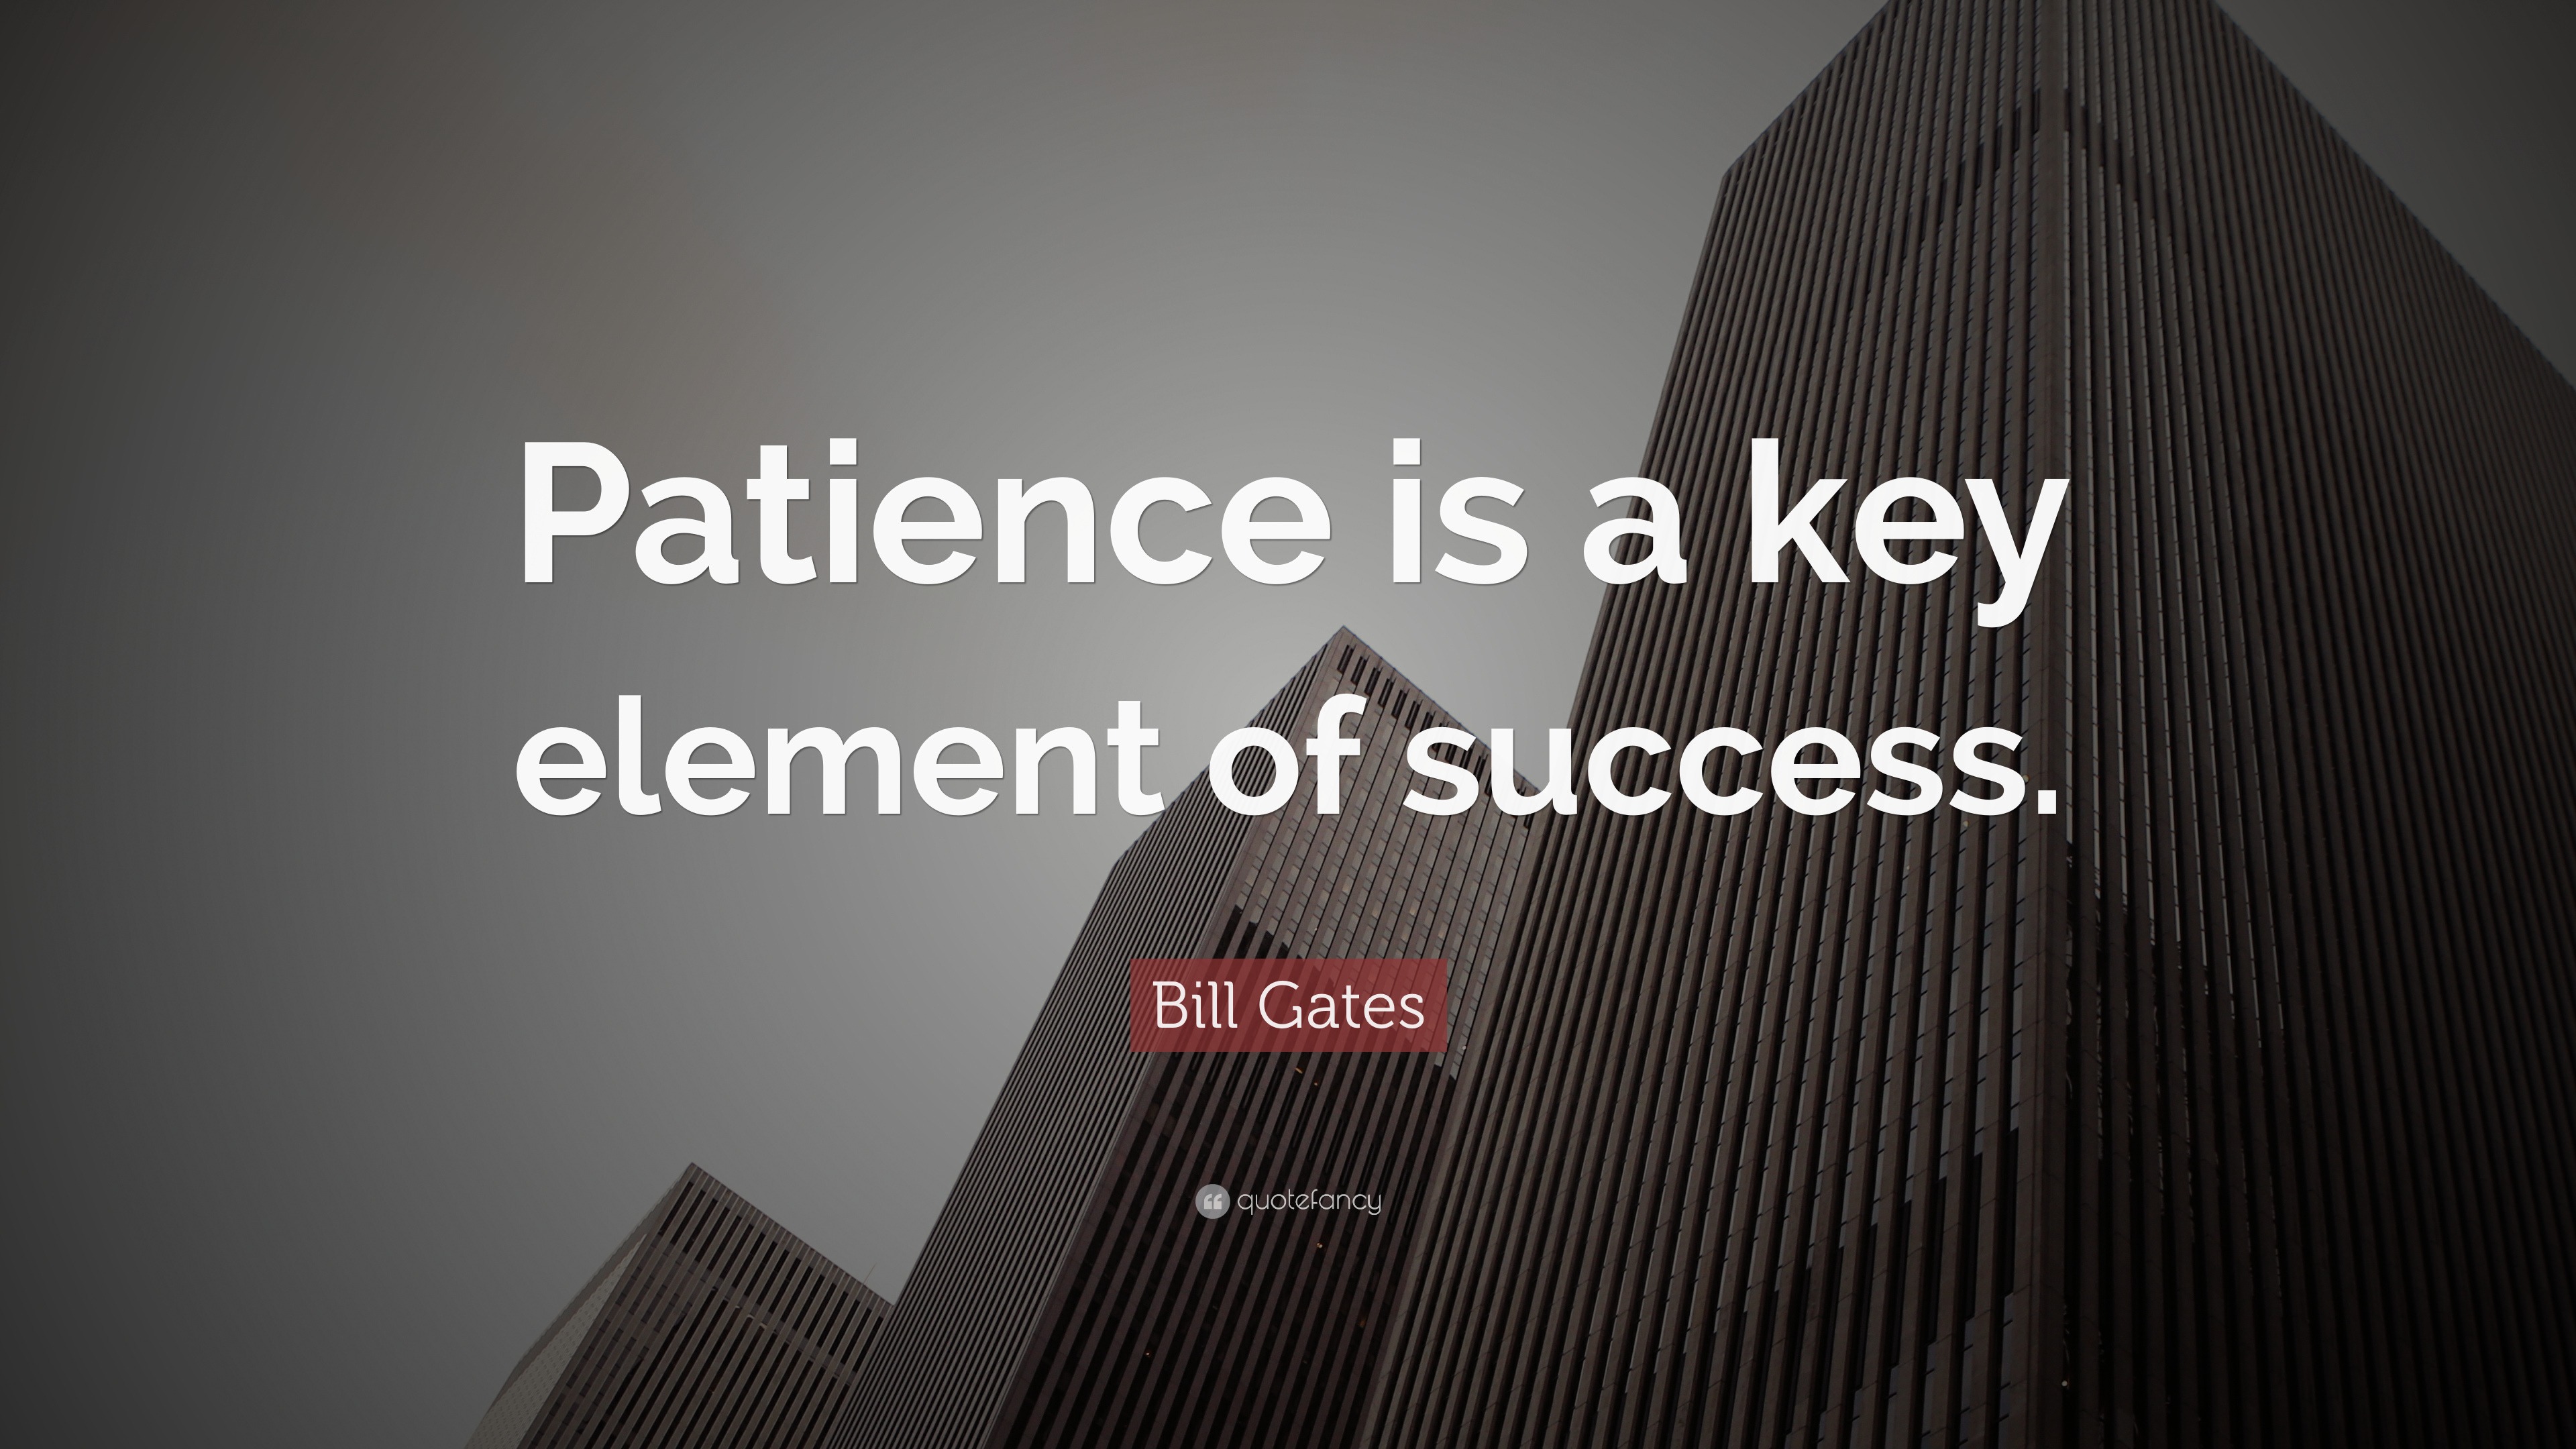 Bill Gates Quotes (100 wallpapers) - Quotefancy